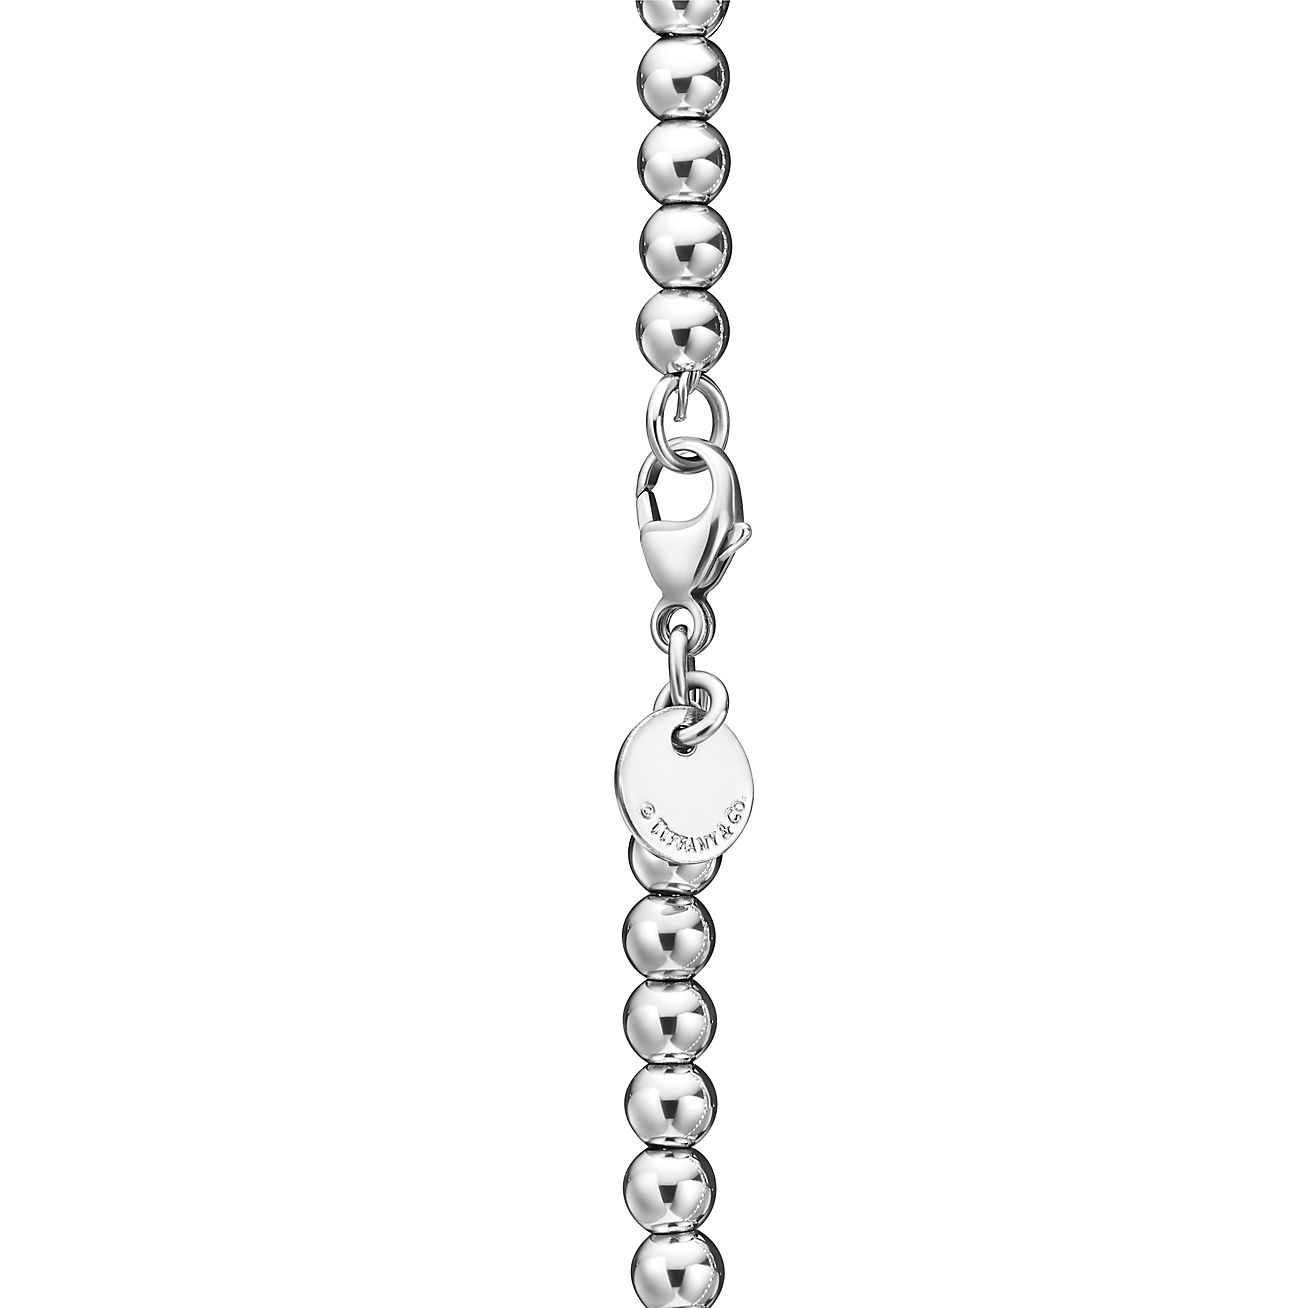 Return to Tiffany® Bead Bracelet in Silver, Tiffany Blue® with a 